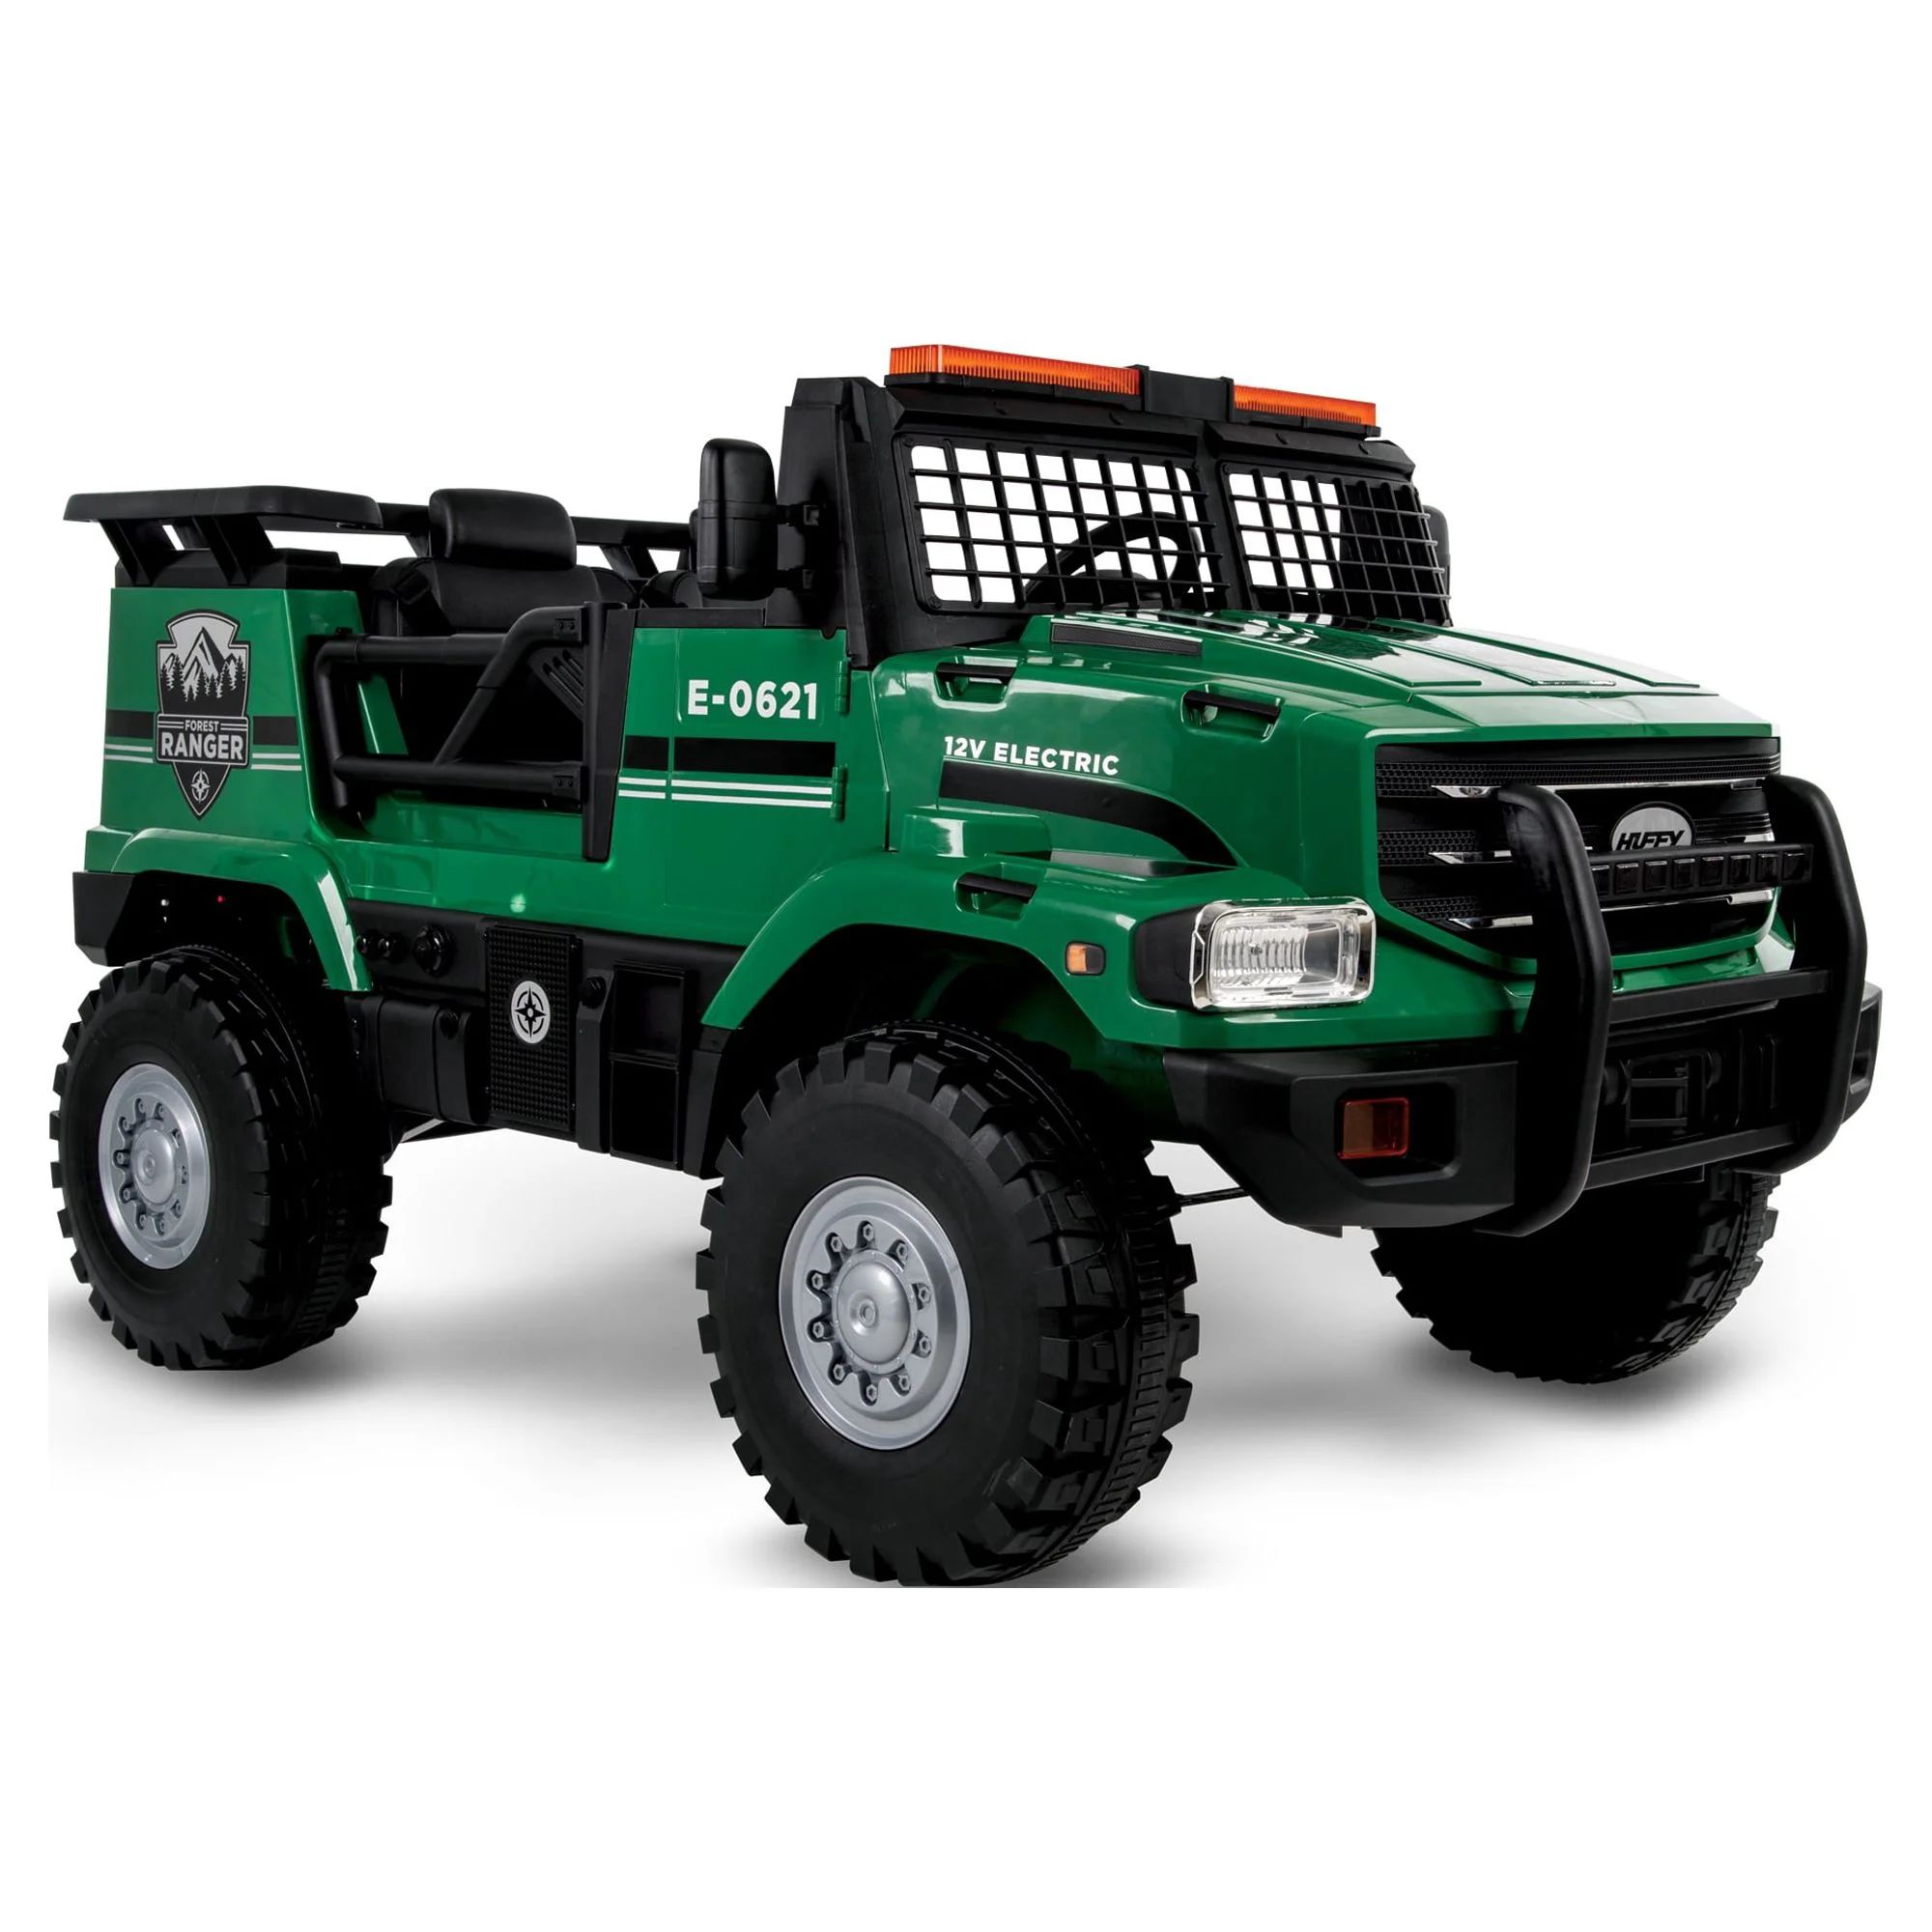 Huffy 12V Forest Ranger Truck Battery Powered Ride-on Toy for a Child, Ages 3+ Years, Green | Walmart (US)